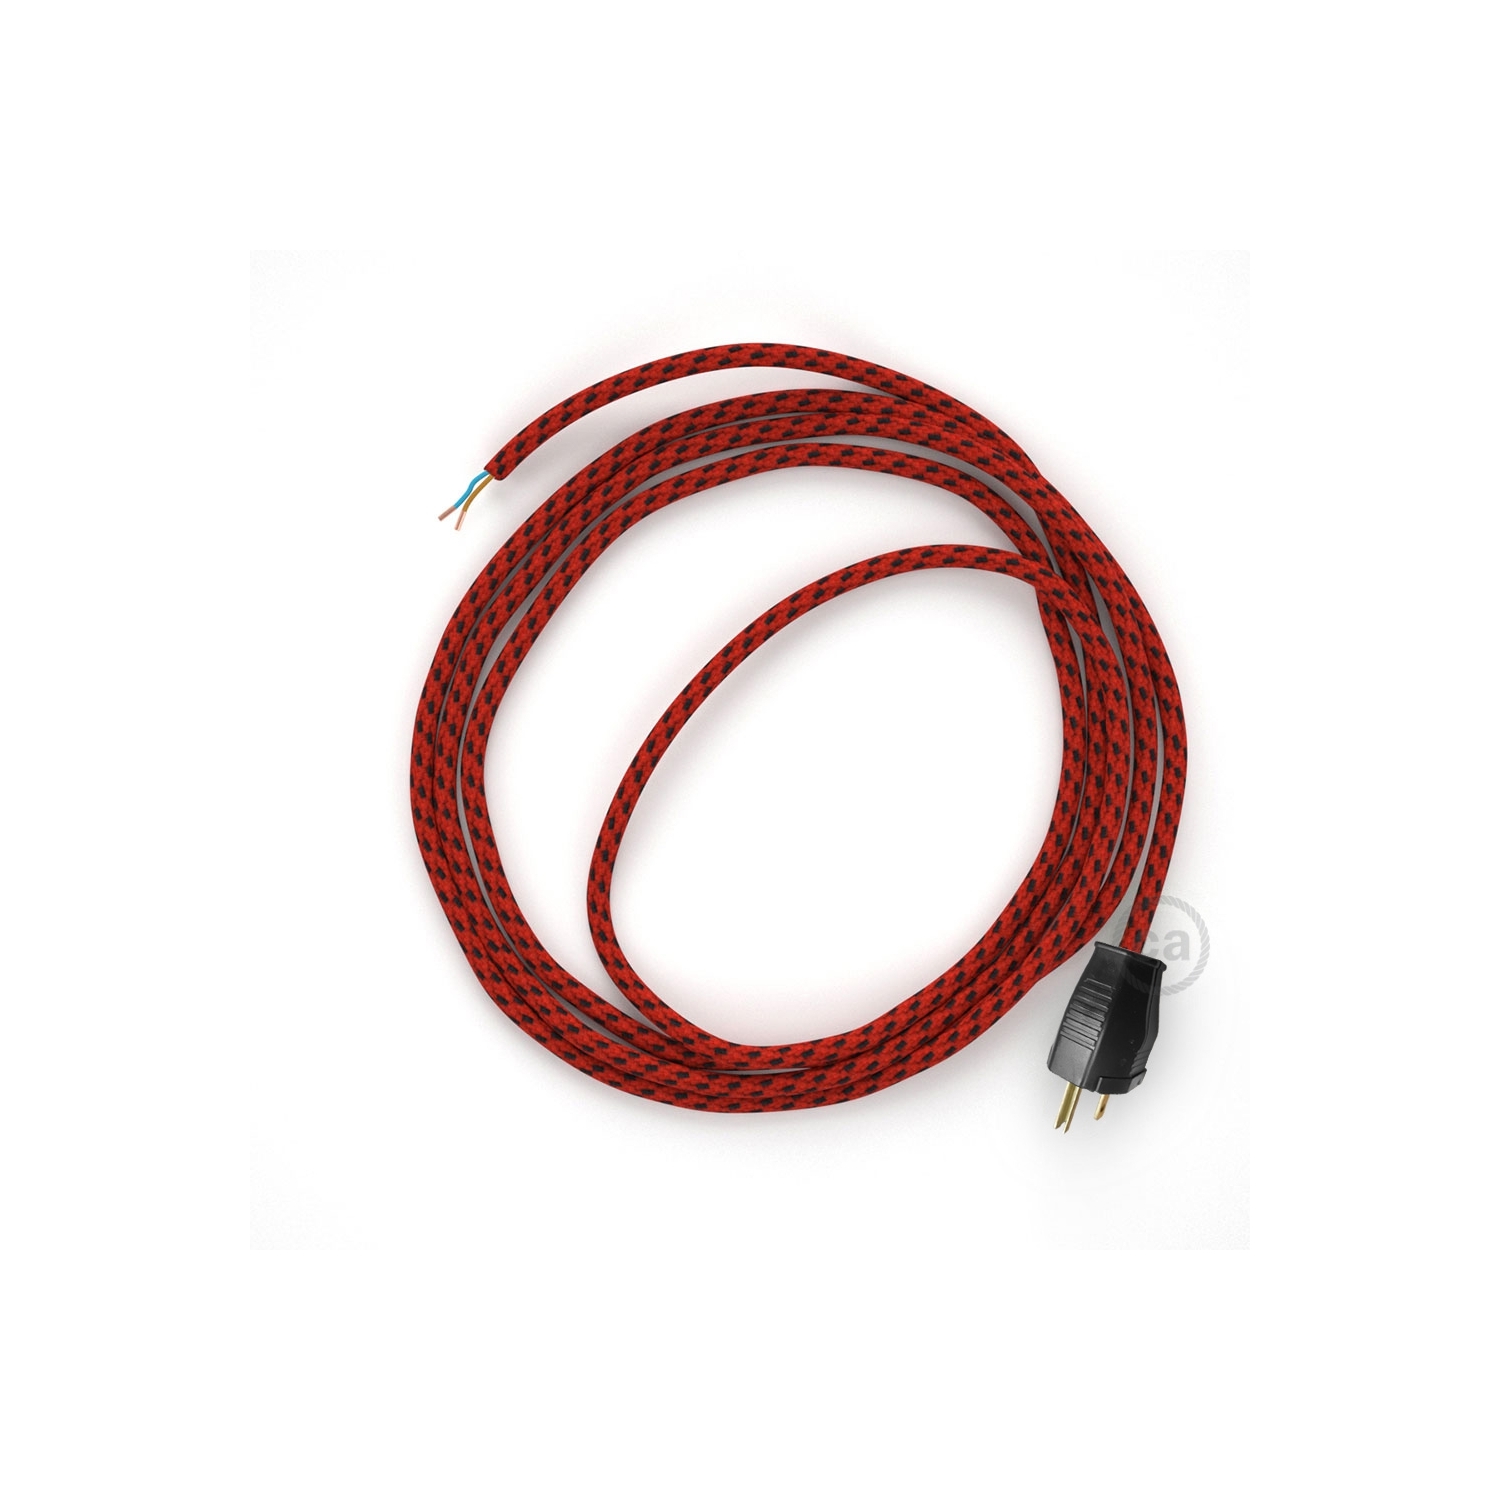 Cord-set - RT94 Red & Black Tracer Covered Round Cable